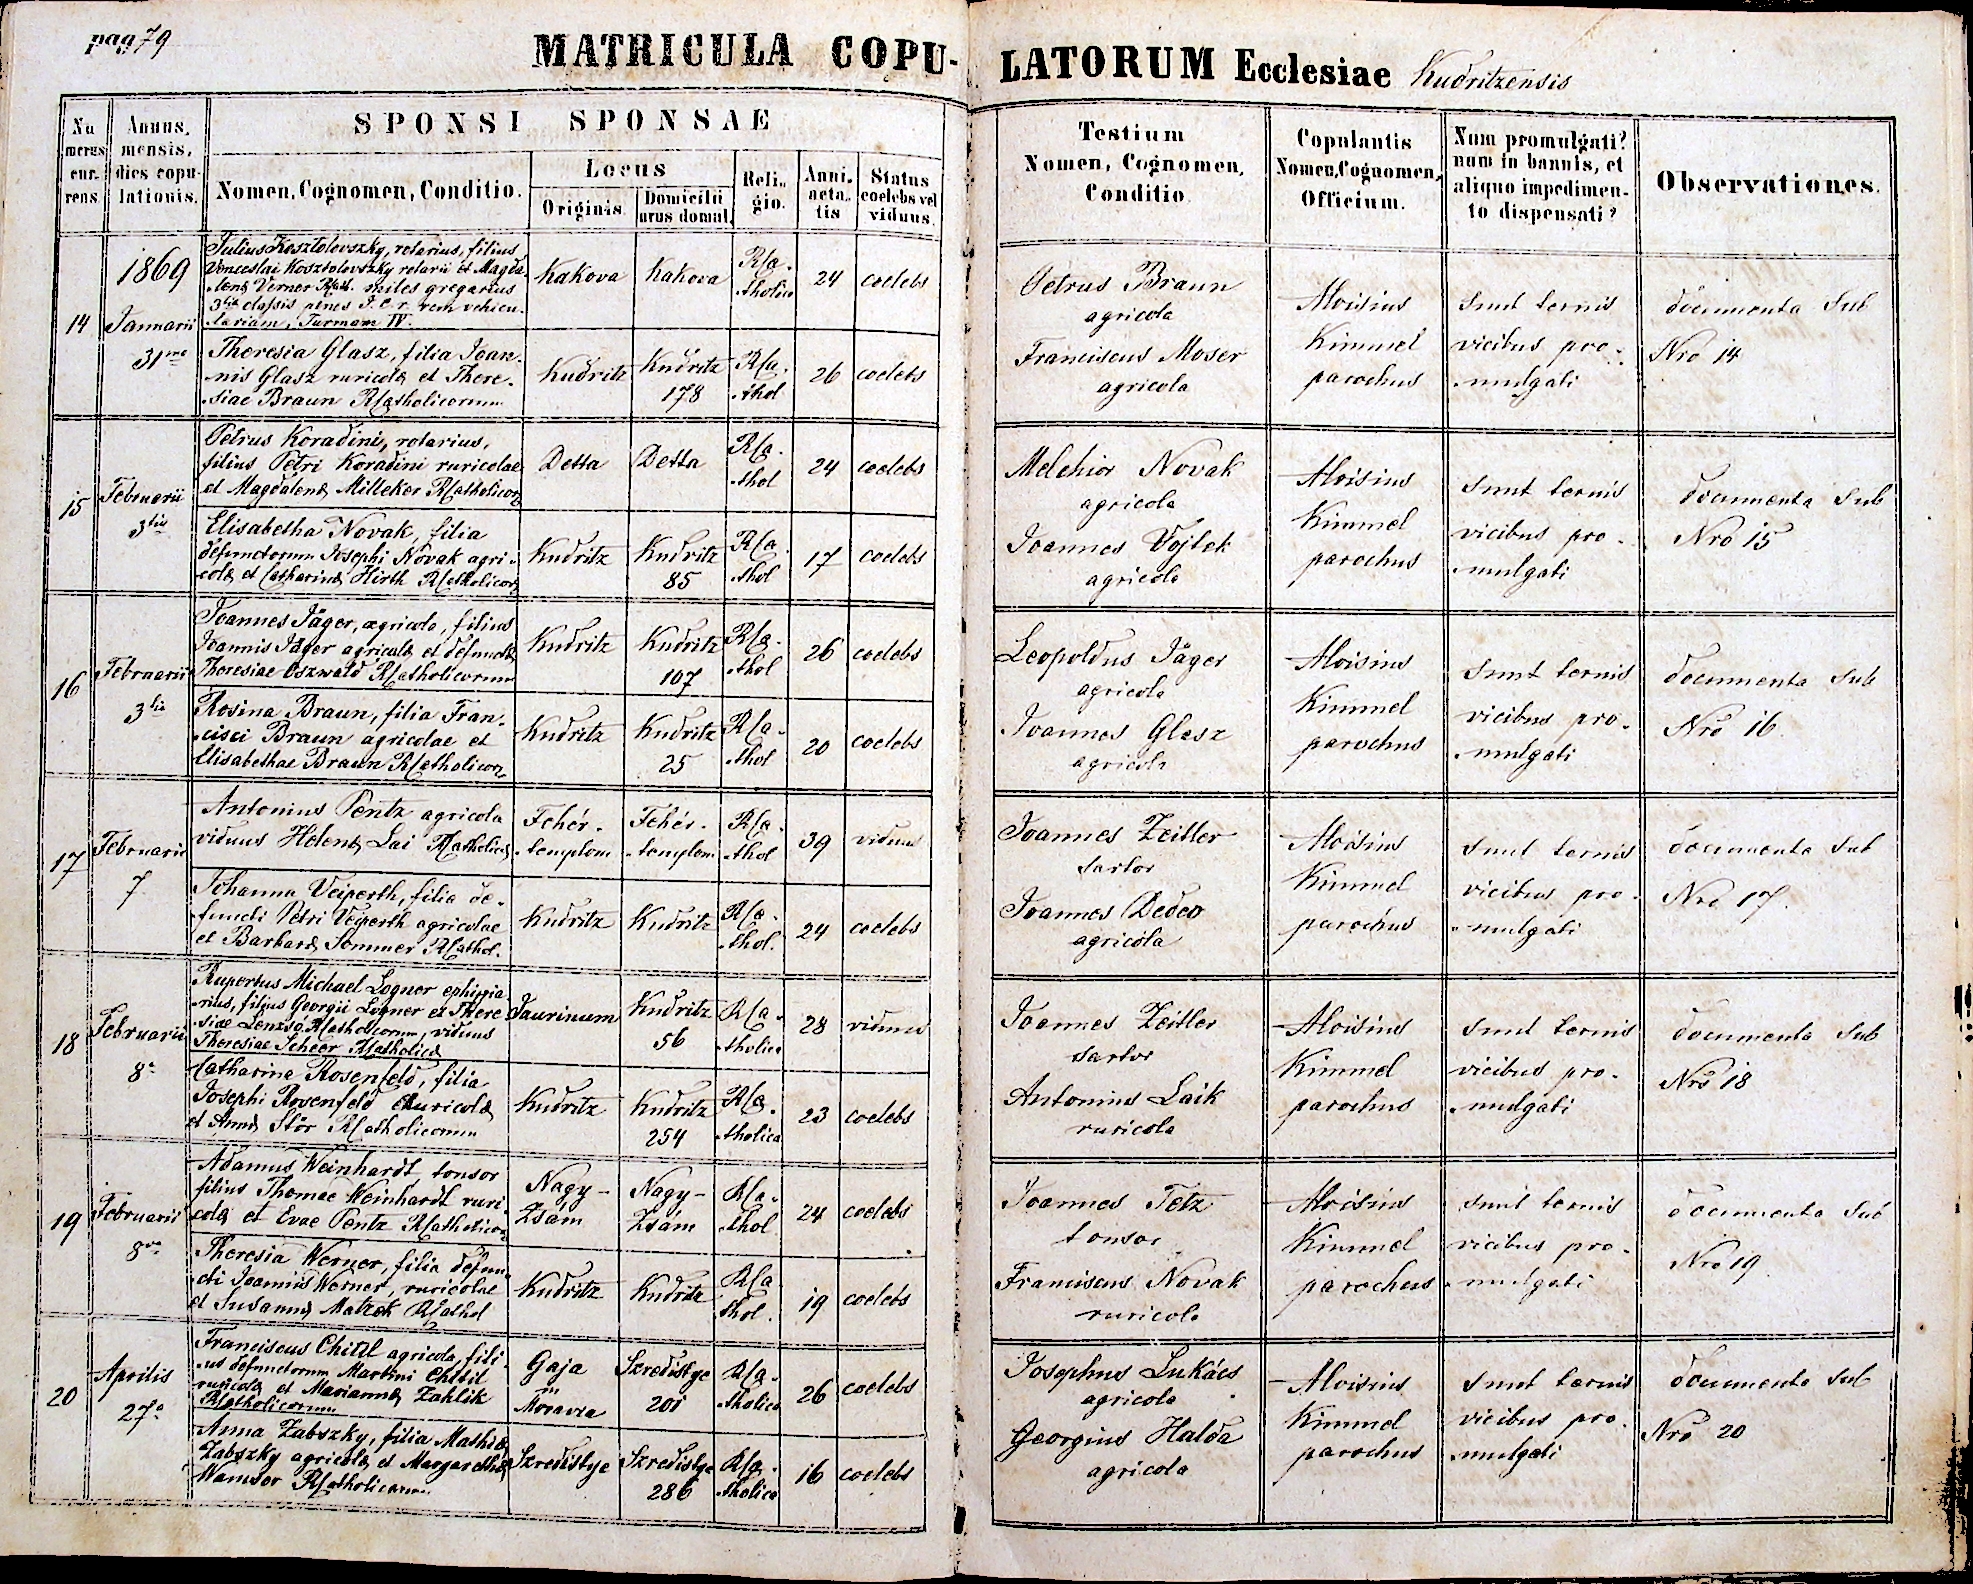 images/church_records/MARRIAGES/1852-1871M/079